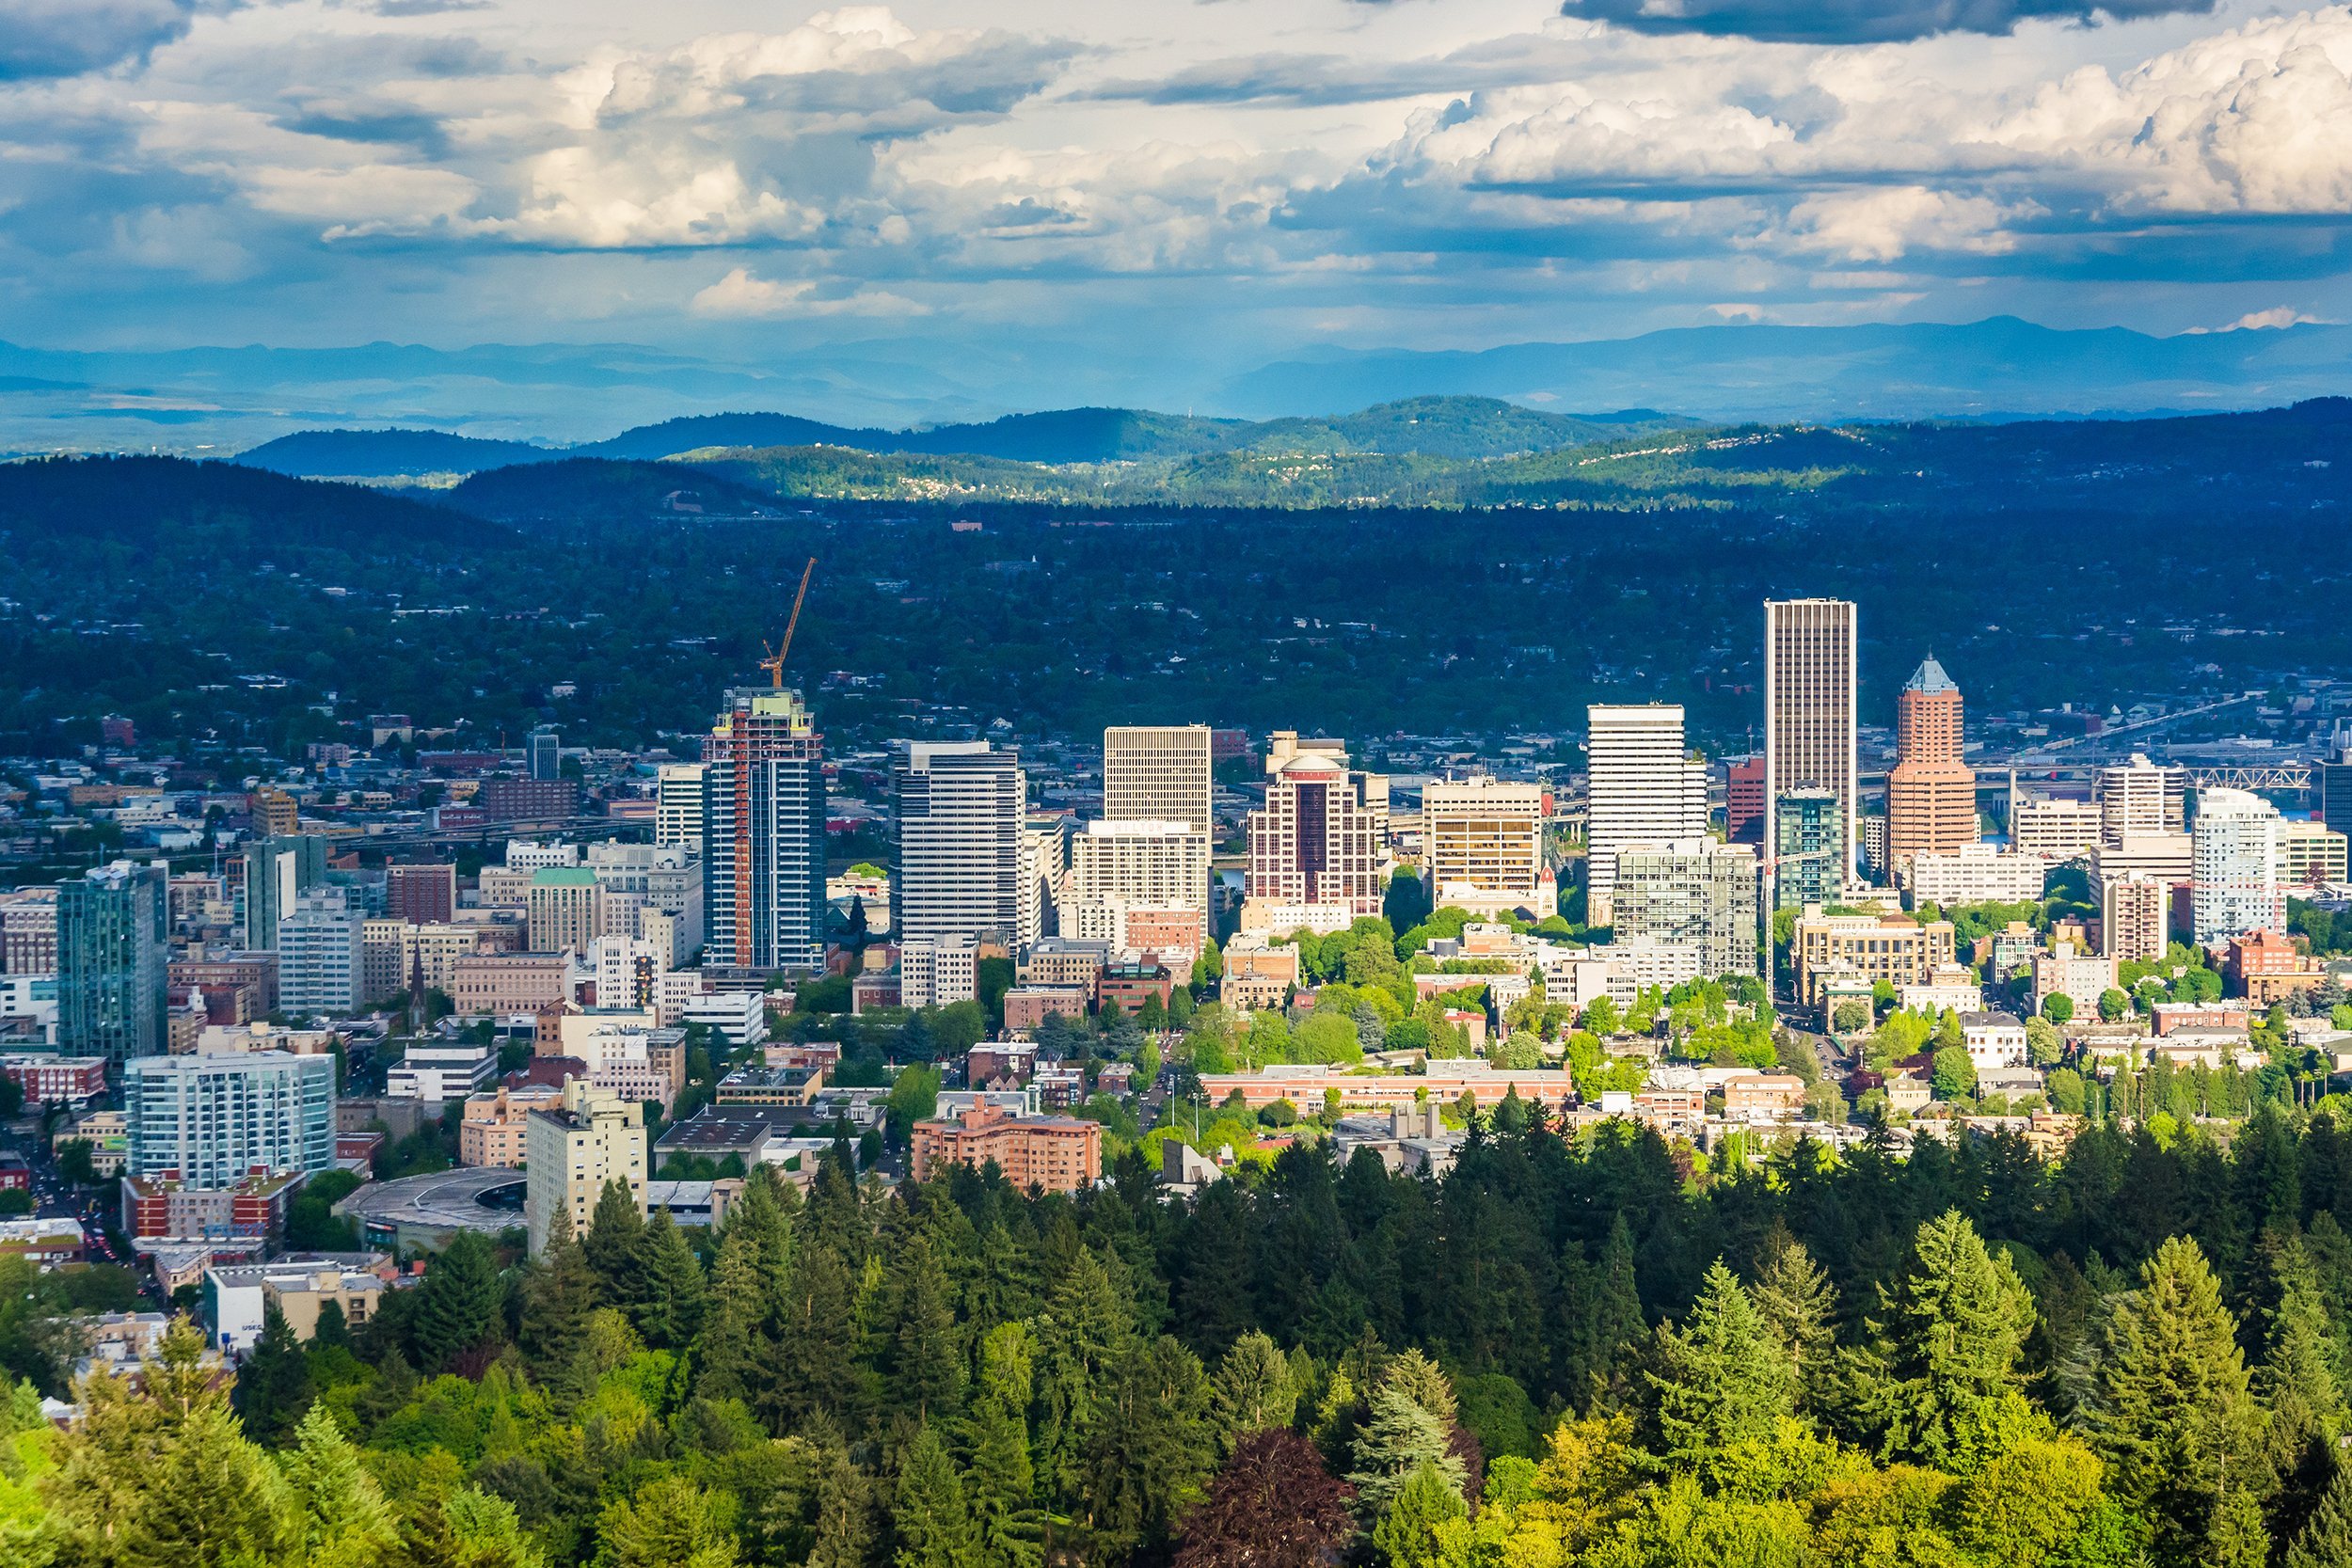 <p>Portland has the International Rose Test Garden, Portland Art Museum, and Saturday Market, and really comes alive from June through August. But along with the sunshine comes crowds and increased hotel prices; September is just as lovely, with a drop in crowds and accommodation prices.</p>